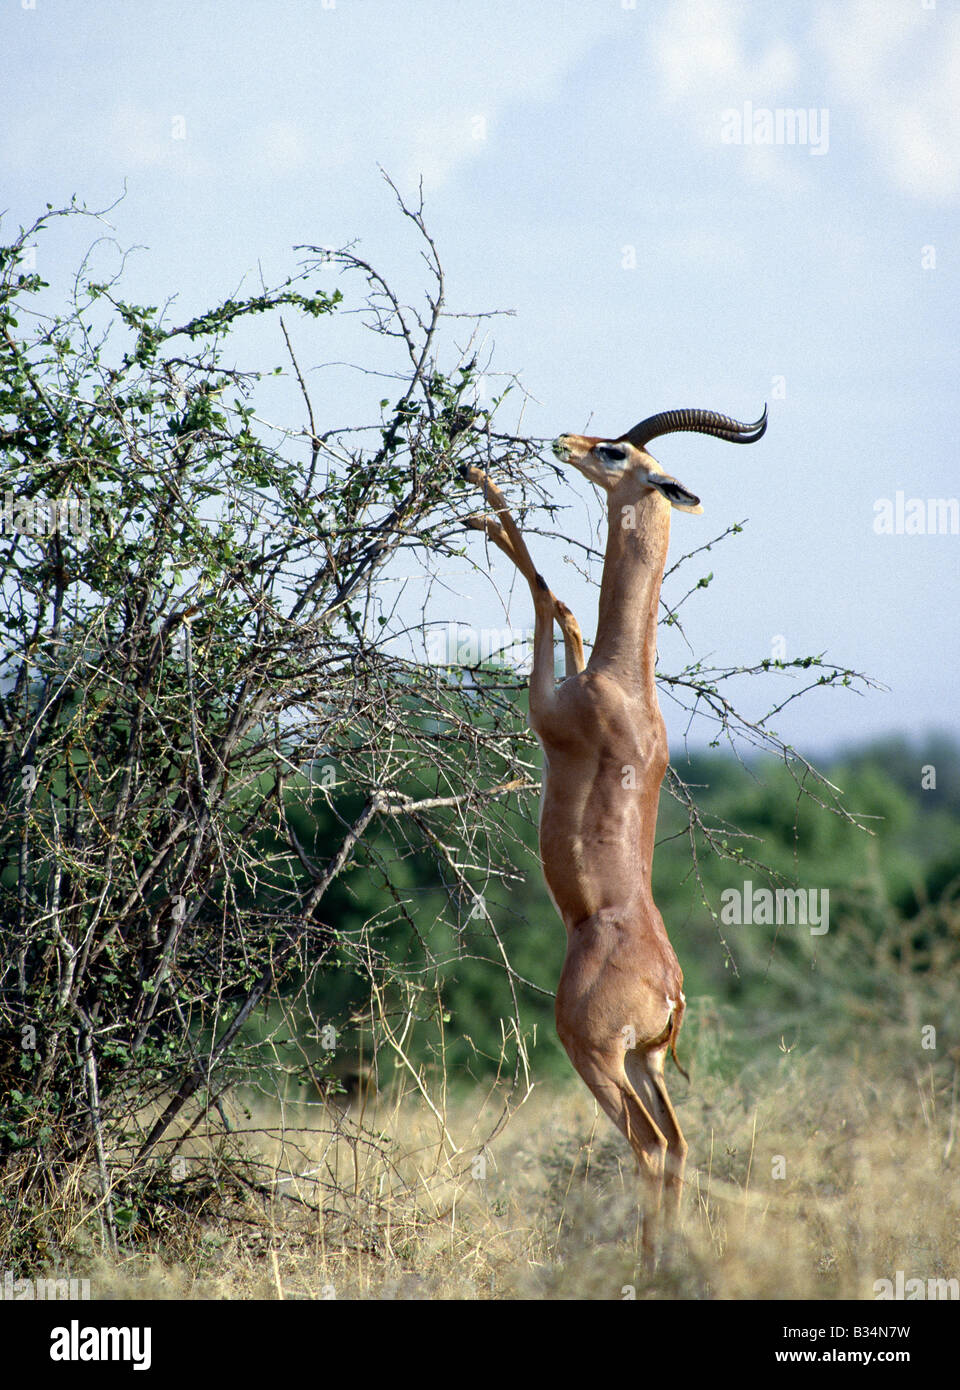 Kenya, Samburu district, Samburu National Reserve. A male gerenuk (a name derived from the Somali language meaning 'giraffe necked') feeding in the Samburu National Reserve of Northern Kenya. Strictly browsers, gerenuk can often been seen feeding on branches six feet high by standing on their wedge-shaped hooves, supported by their strong hind legs.Well adapted to semi-arid lands, they can withstand waterless conditions with ease. . Stock Photo